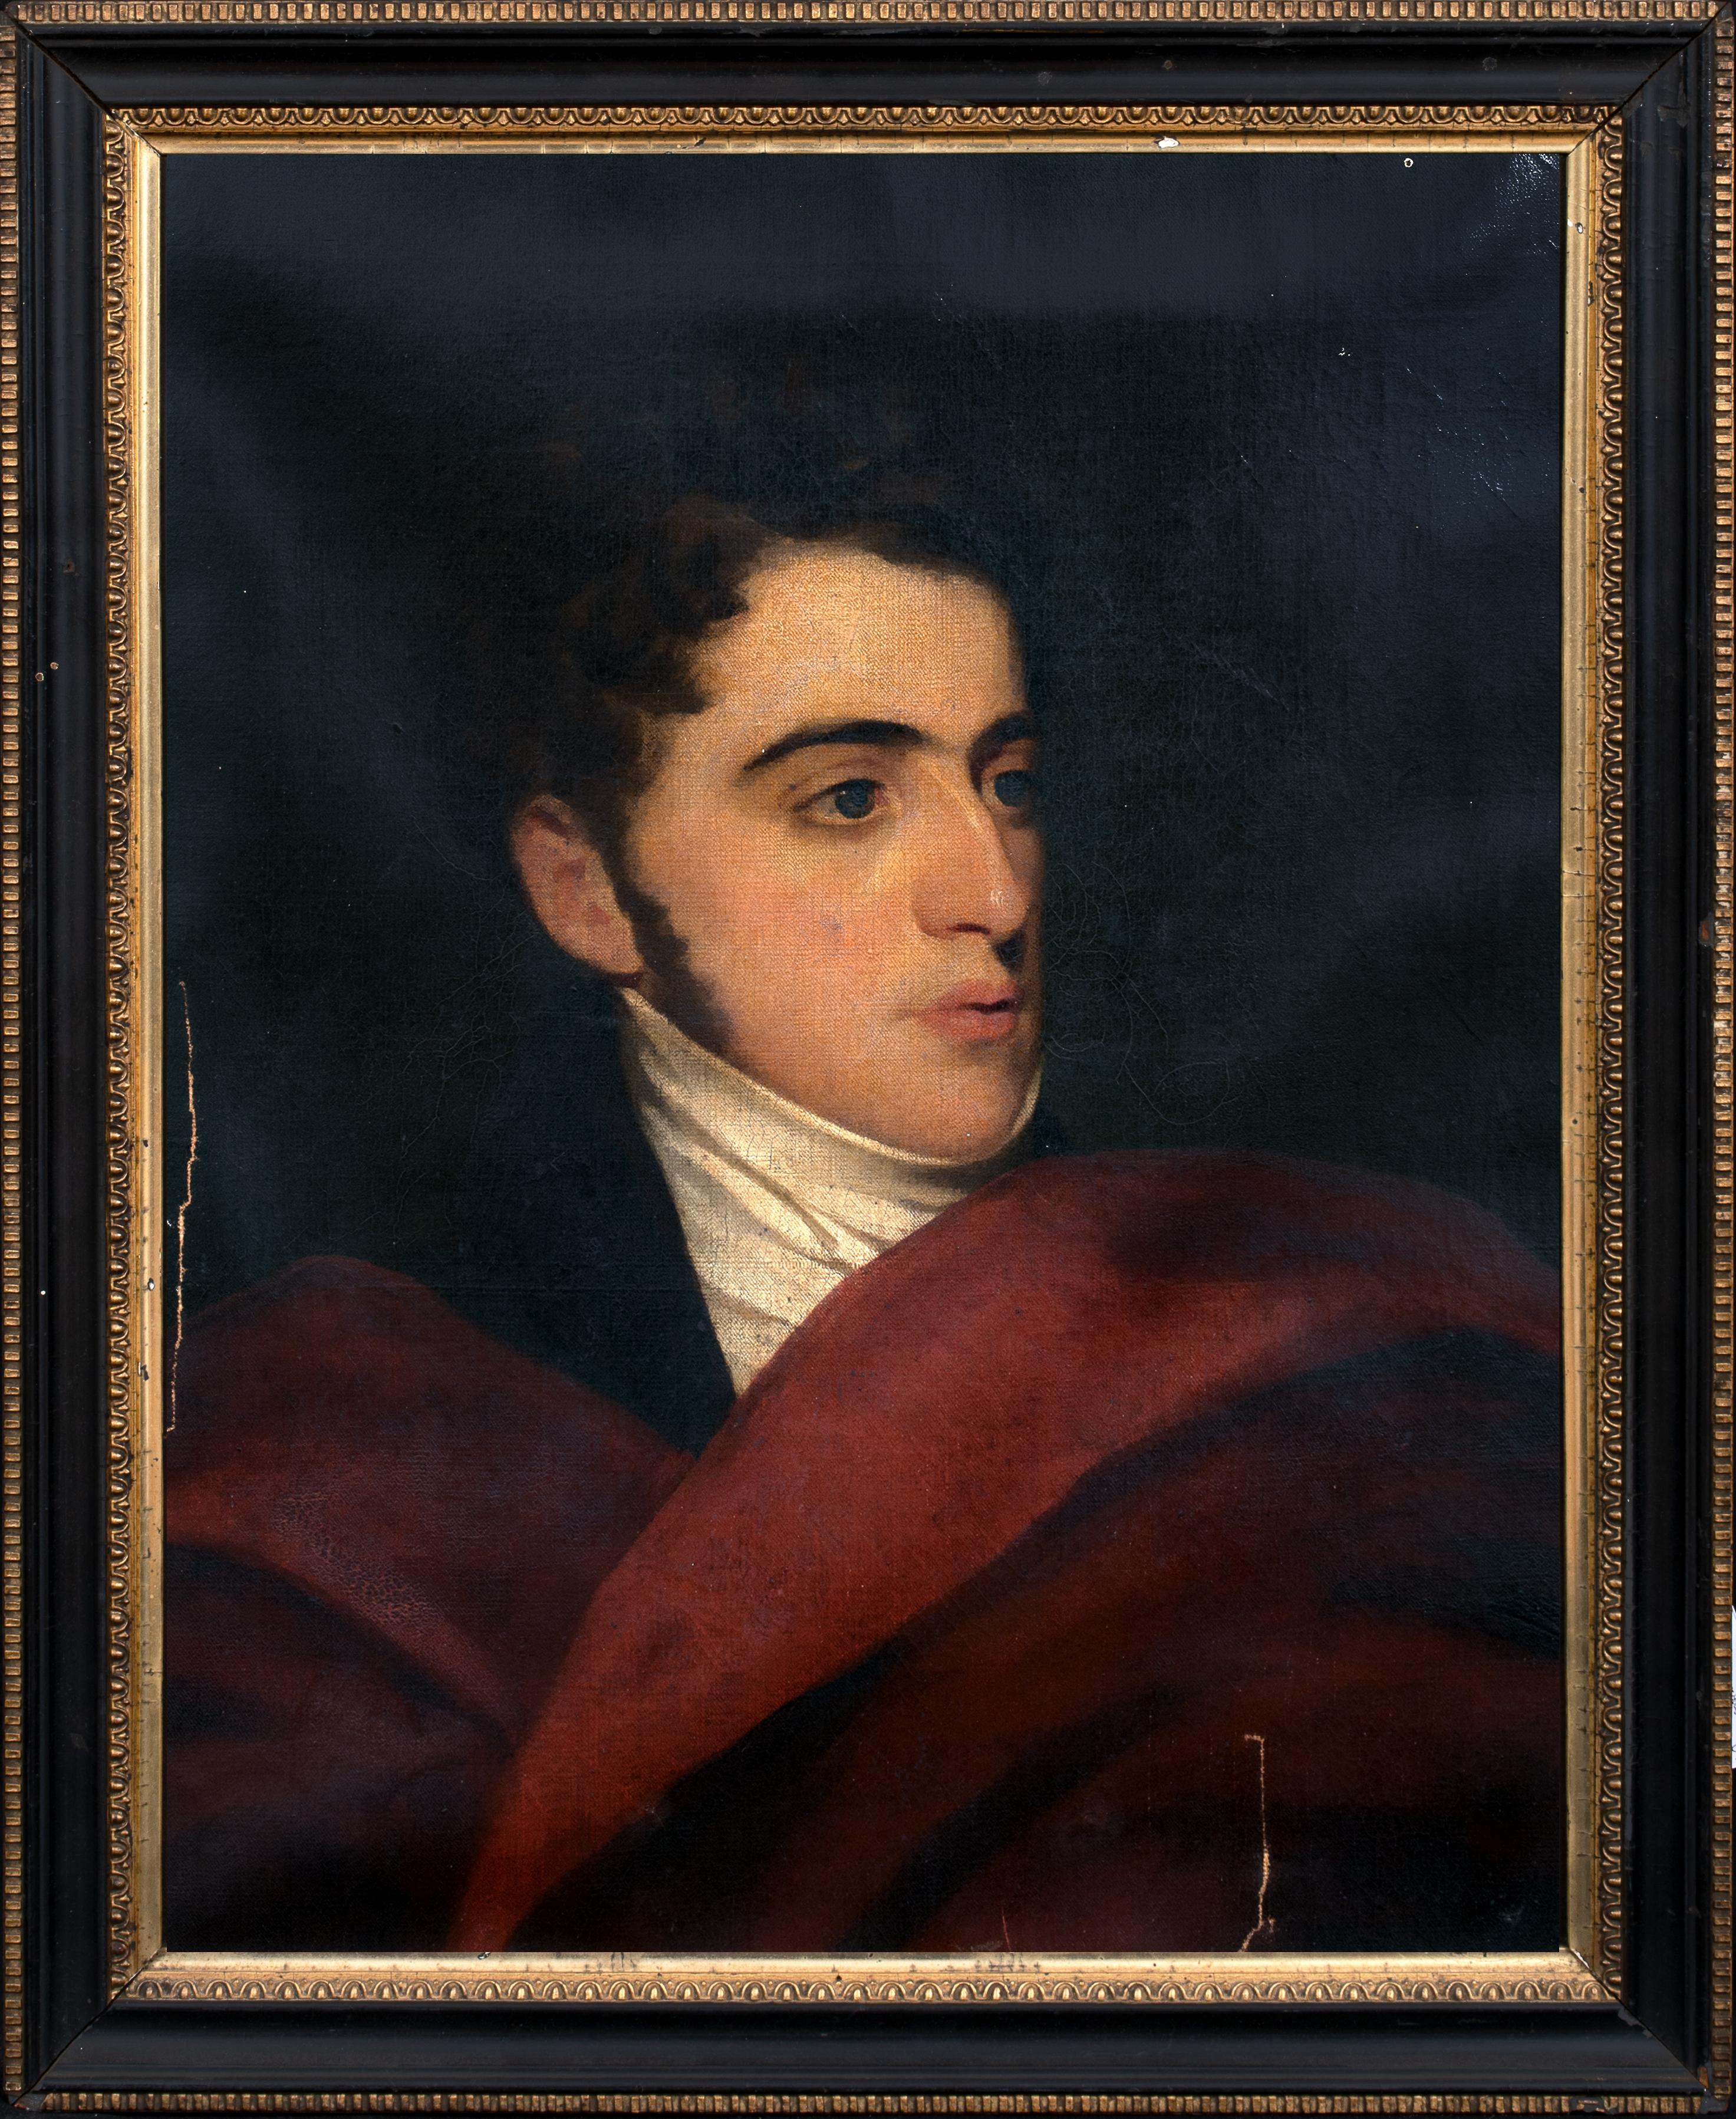 Portrait Of A Young Gentleman, circa 1810   - Black Portrait Painting by Sir Thomas Lawrence